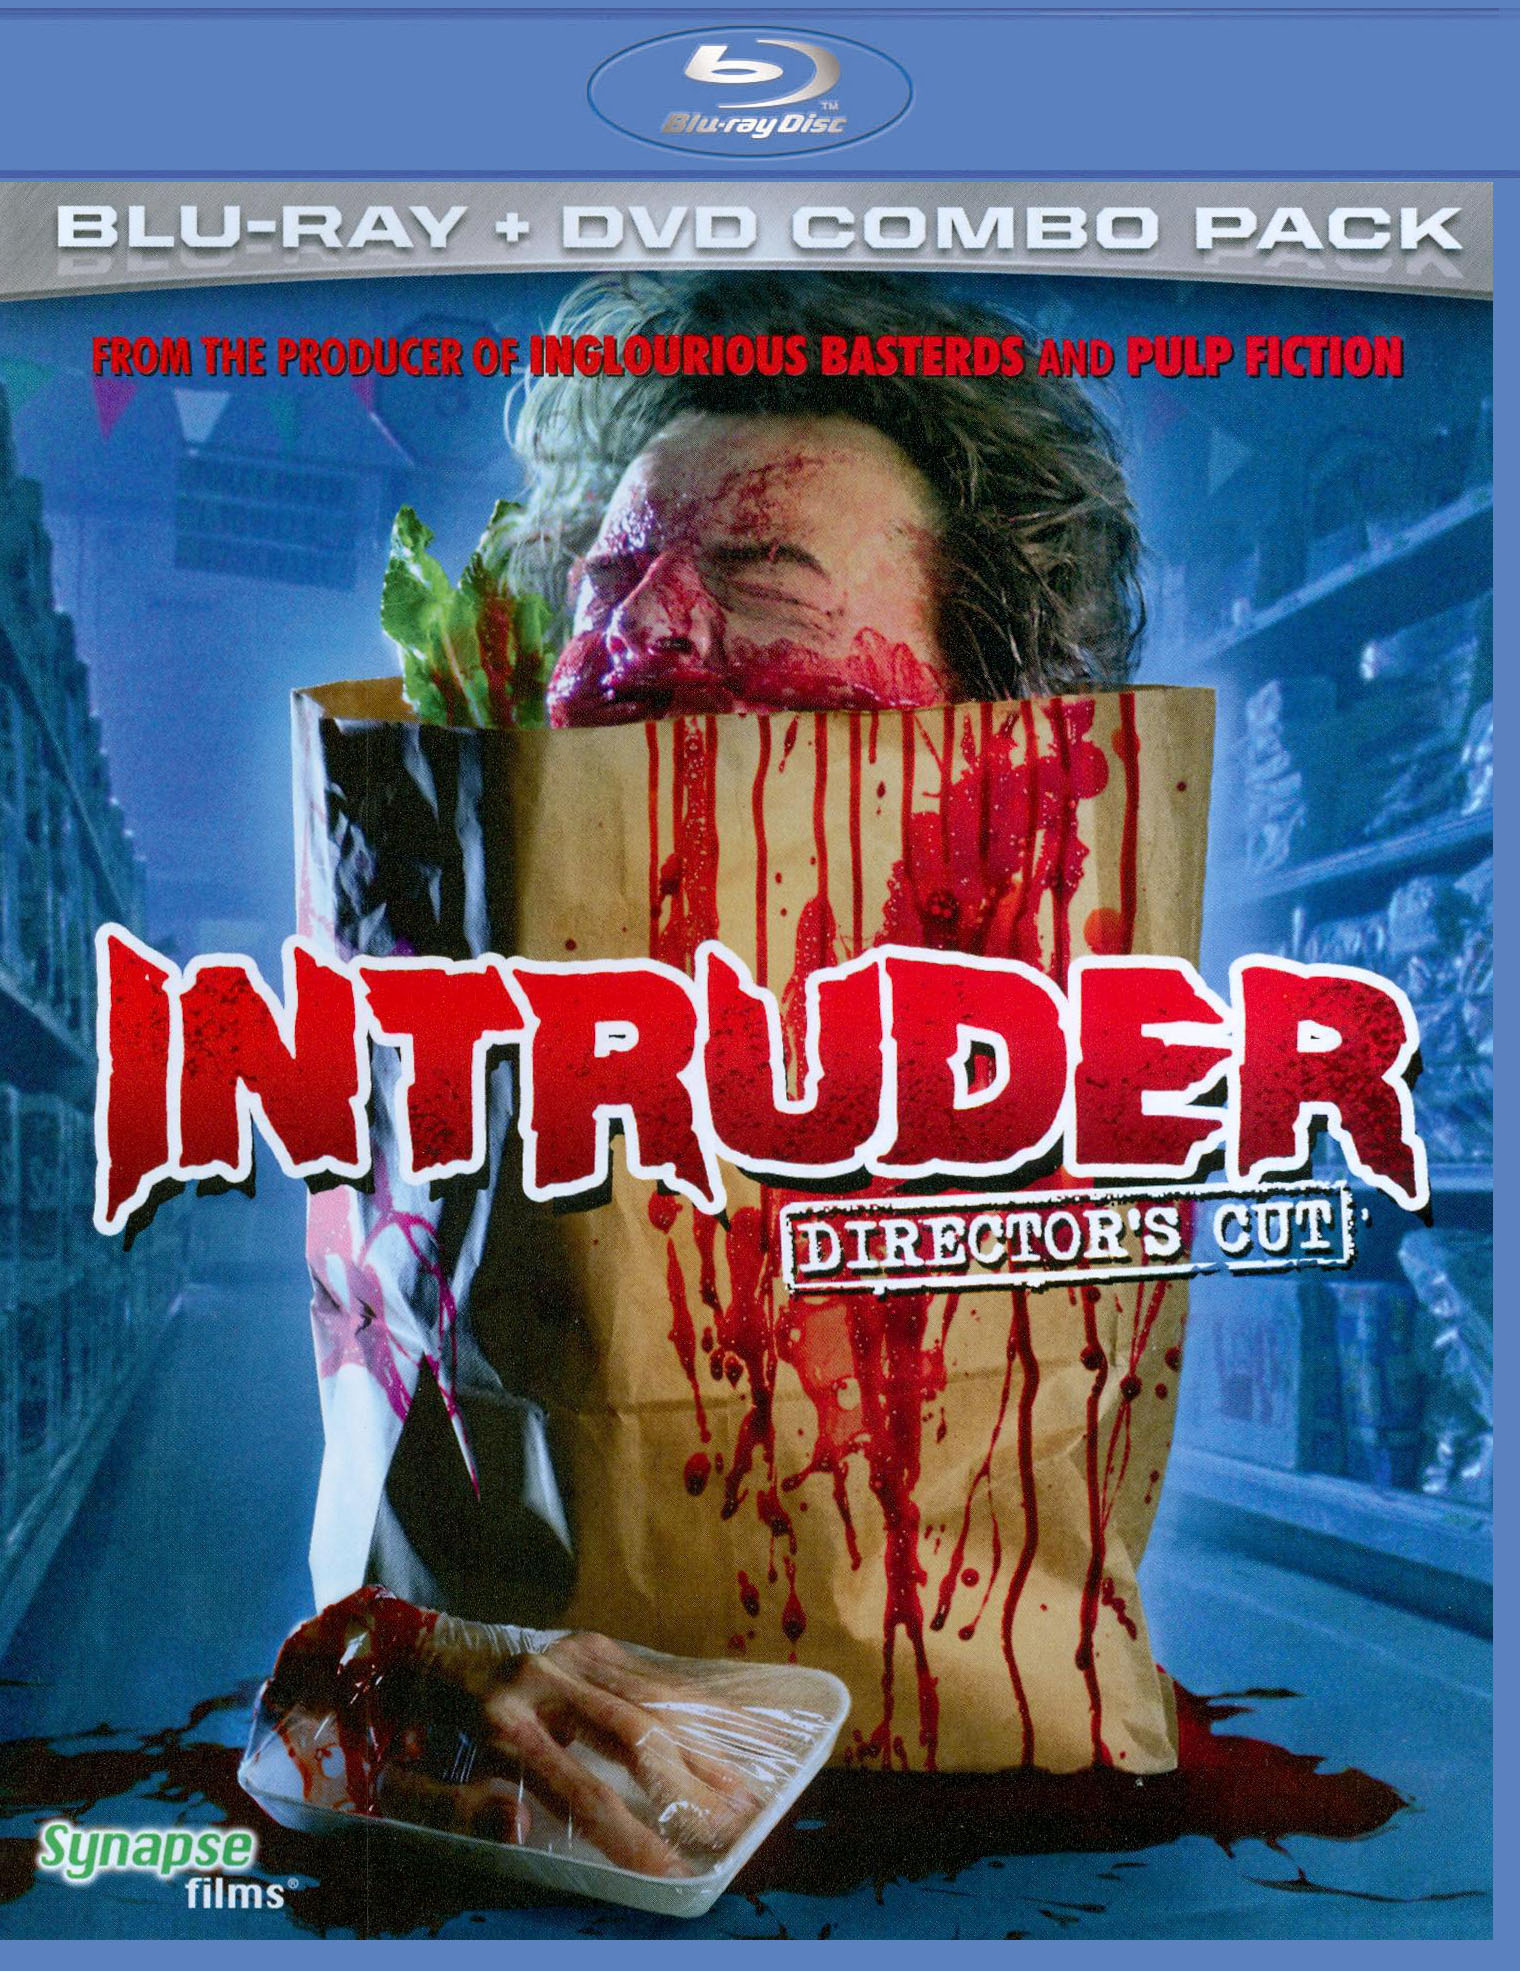 the intruders  Movie posters, Intruders, Horror movies